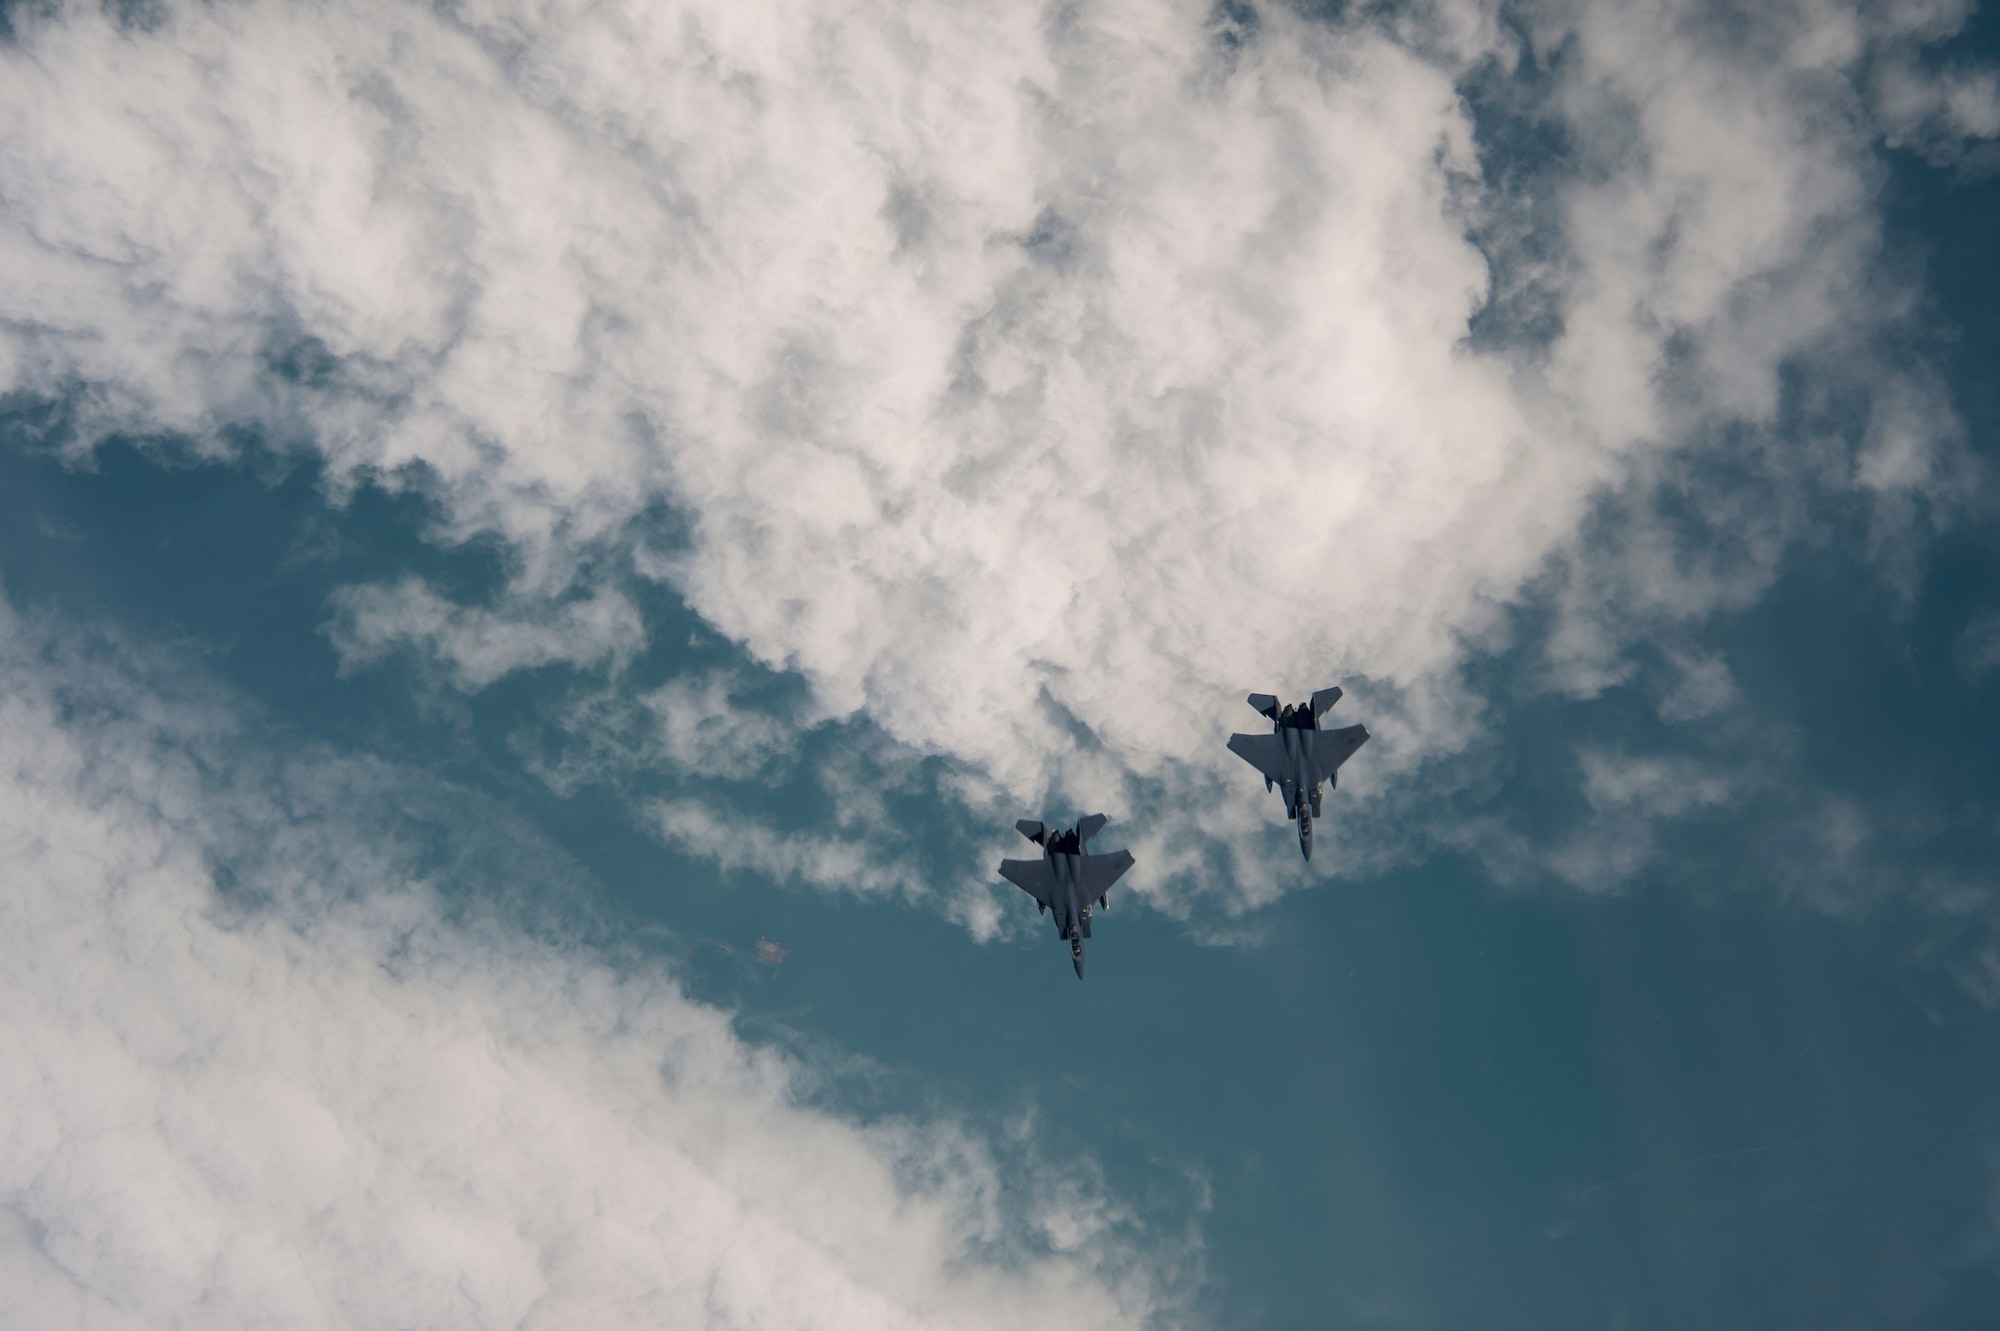 Two U.S. Air Force F-15E Strike Eagles assigned to the 494th Expeditionary Fighter Squadron, fly enroute to participate in a fly over honoring Qatar National Day, Dec. 18, 2019.